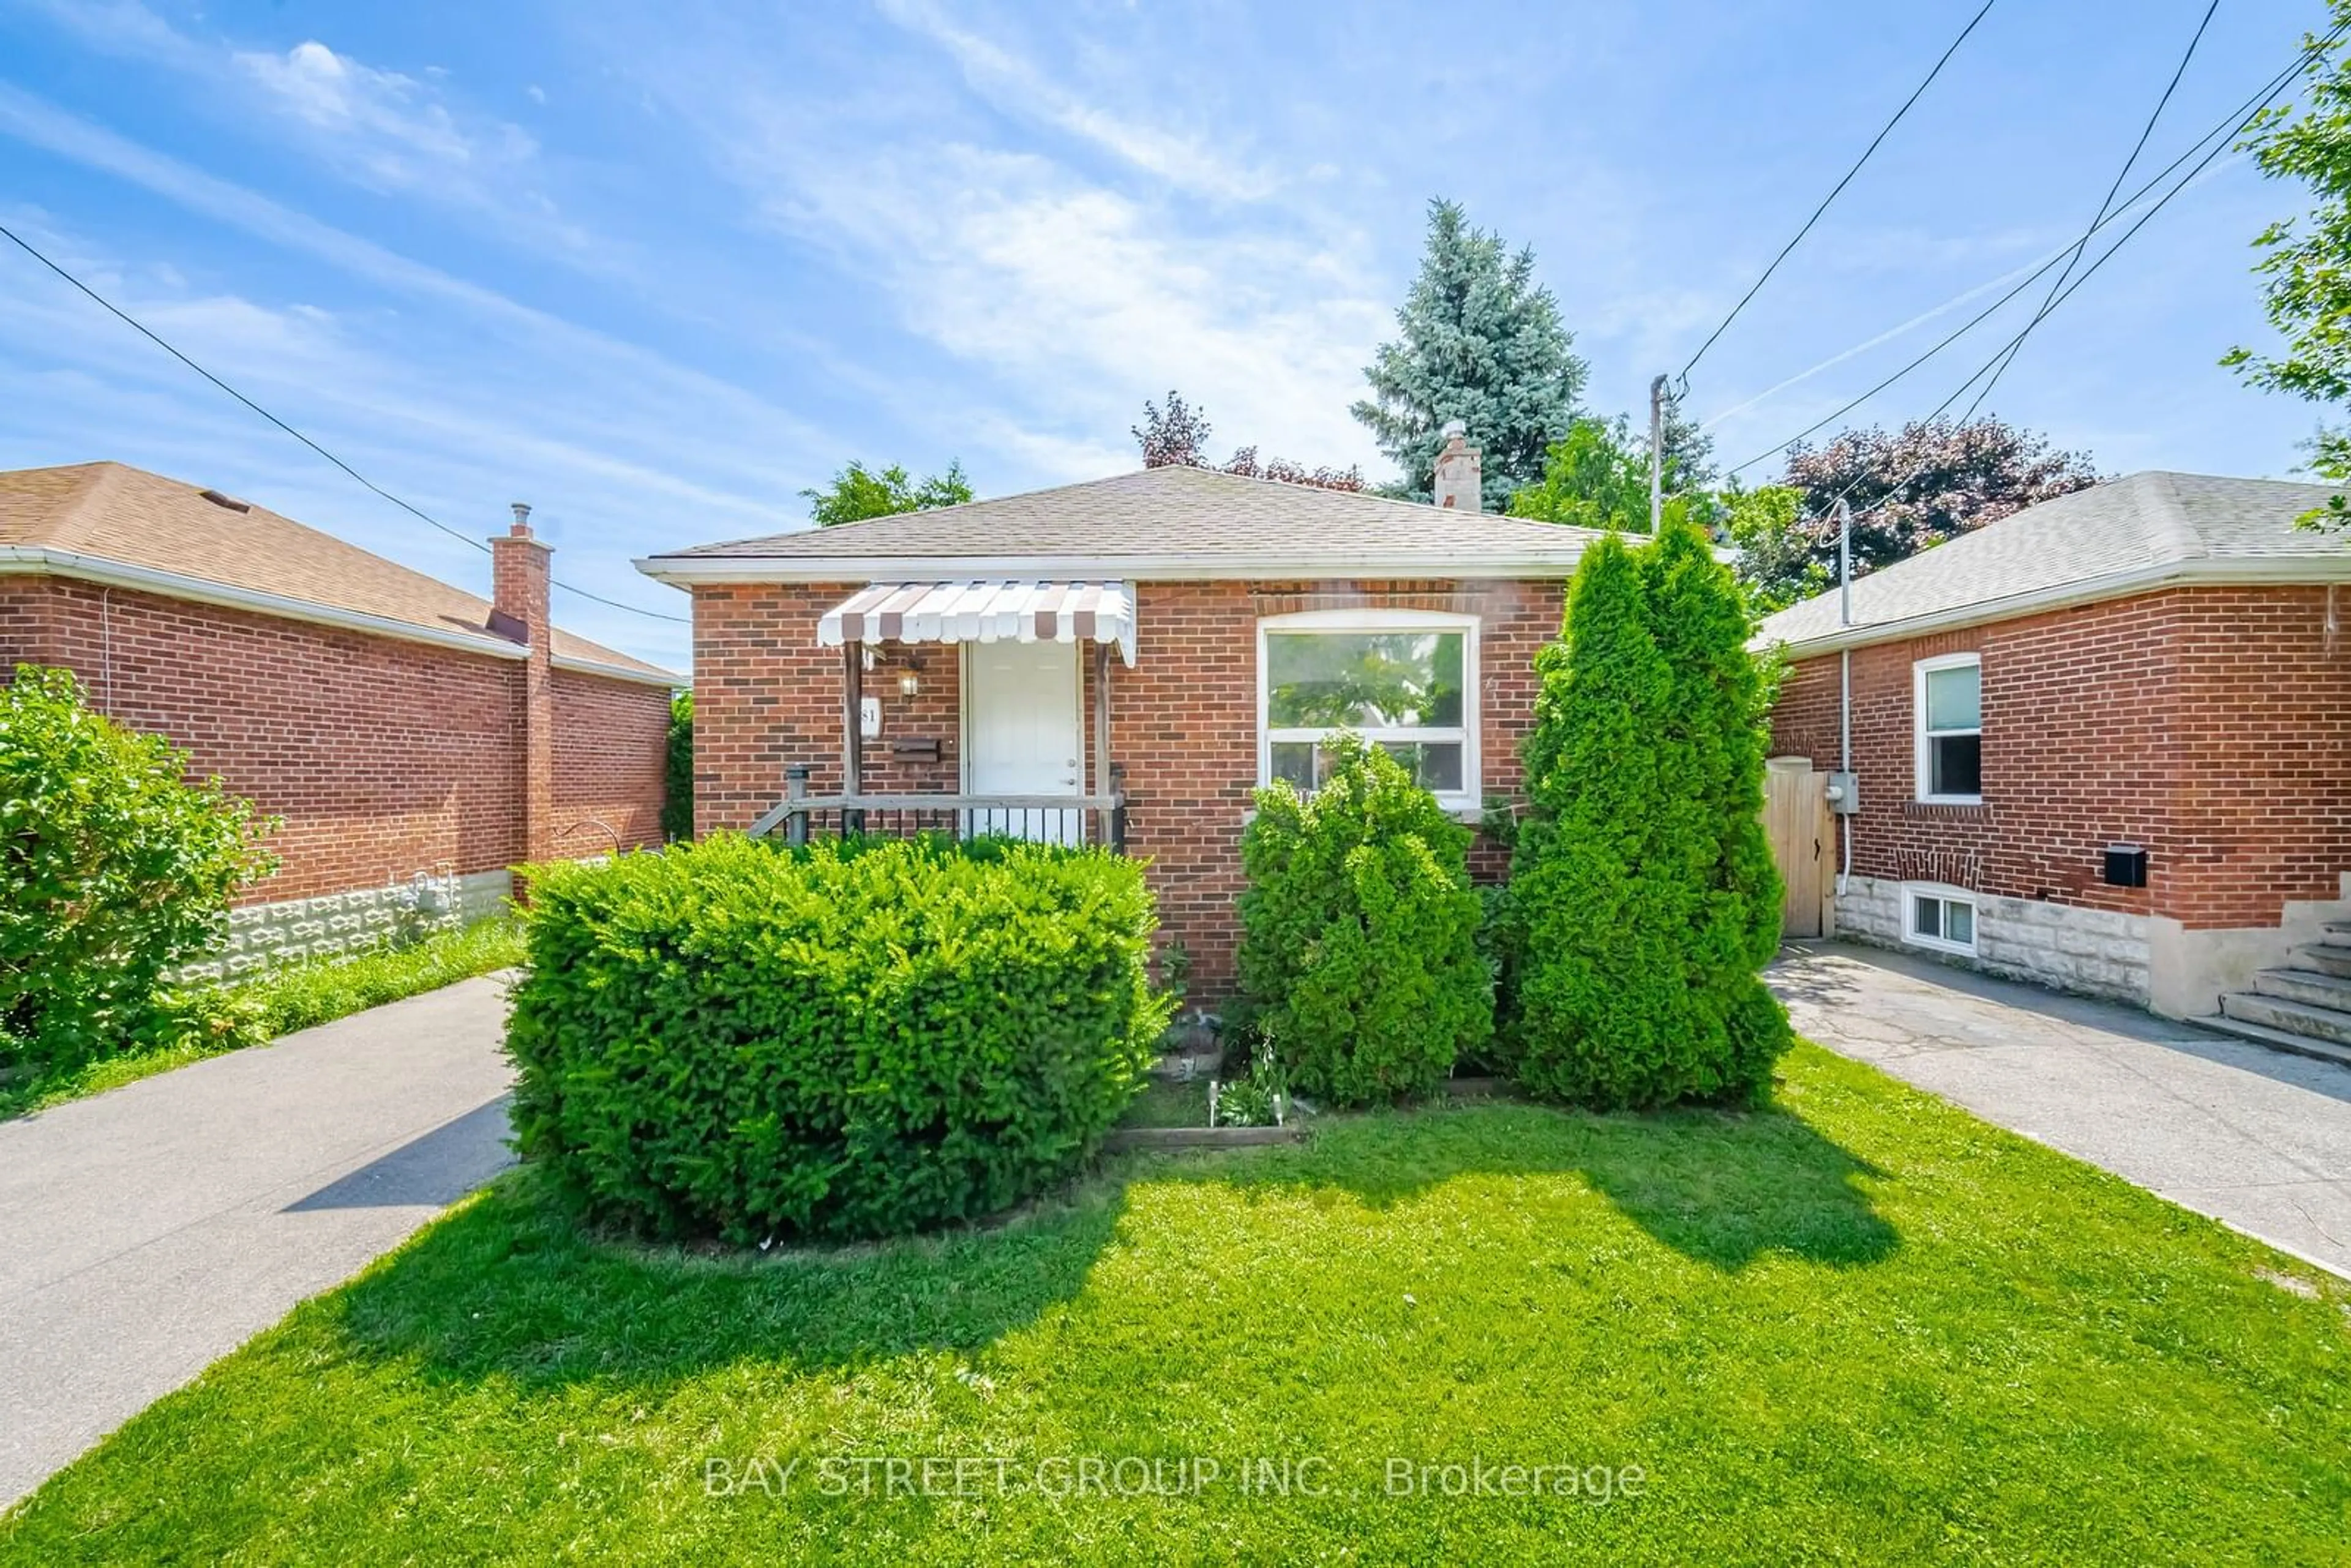 Home with brick exterior material for 81 East 11th St, Hamilton Ontario L9A 3T3